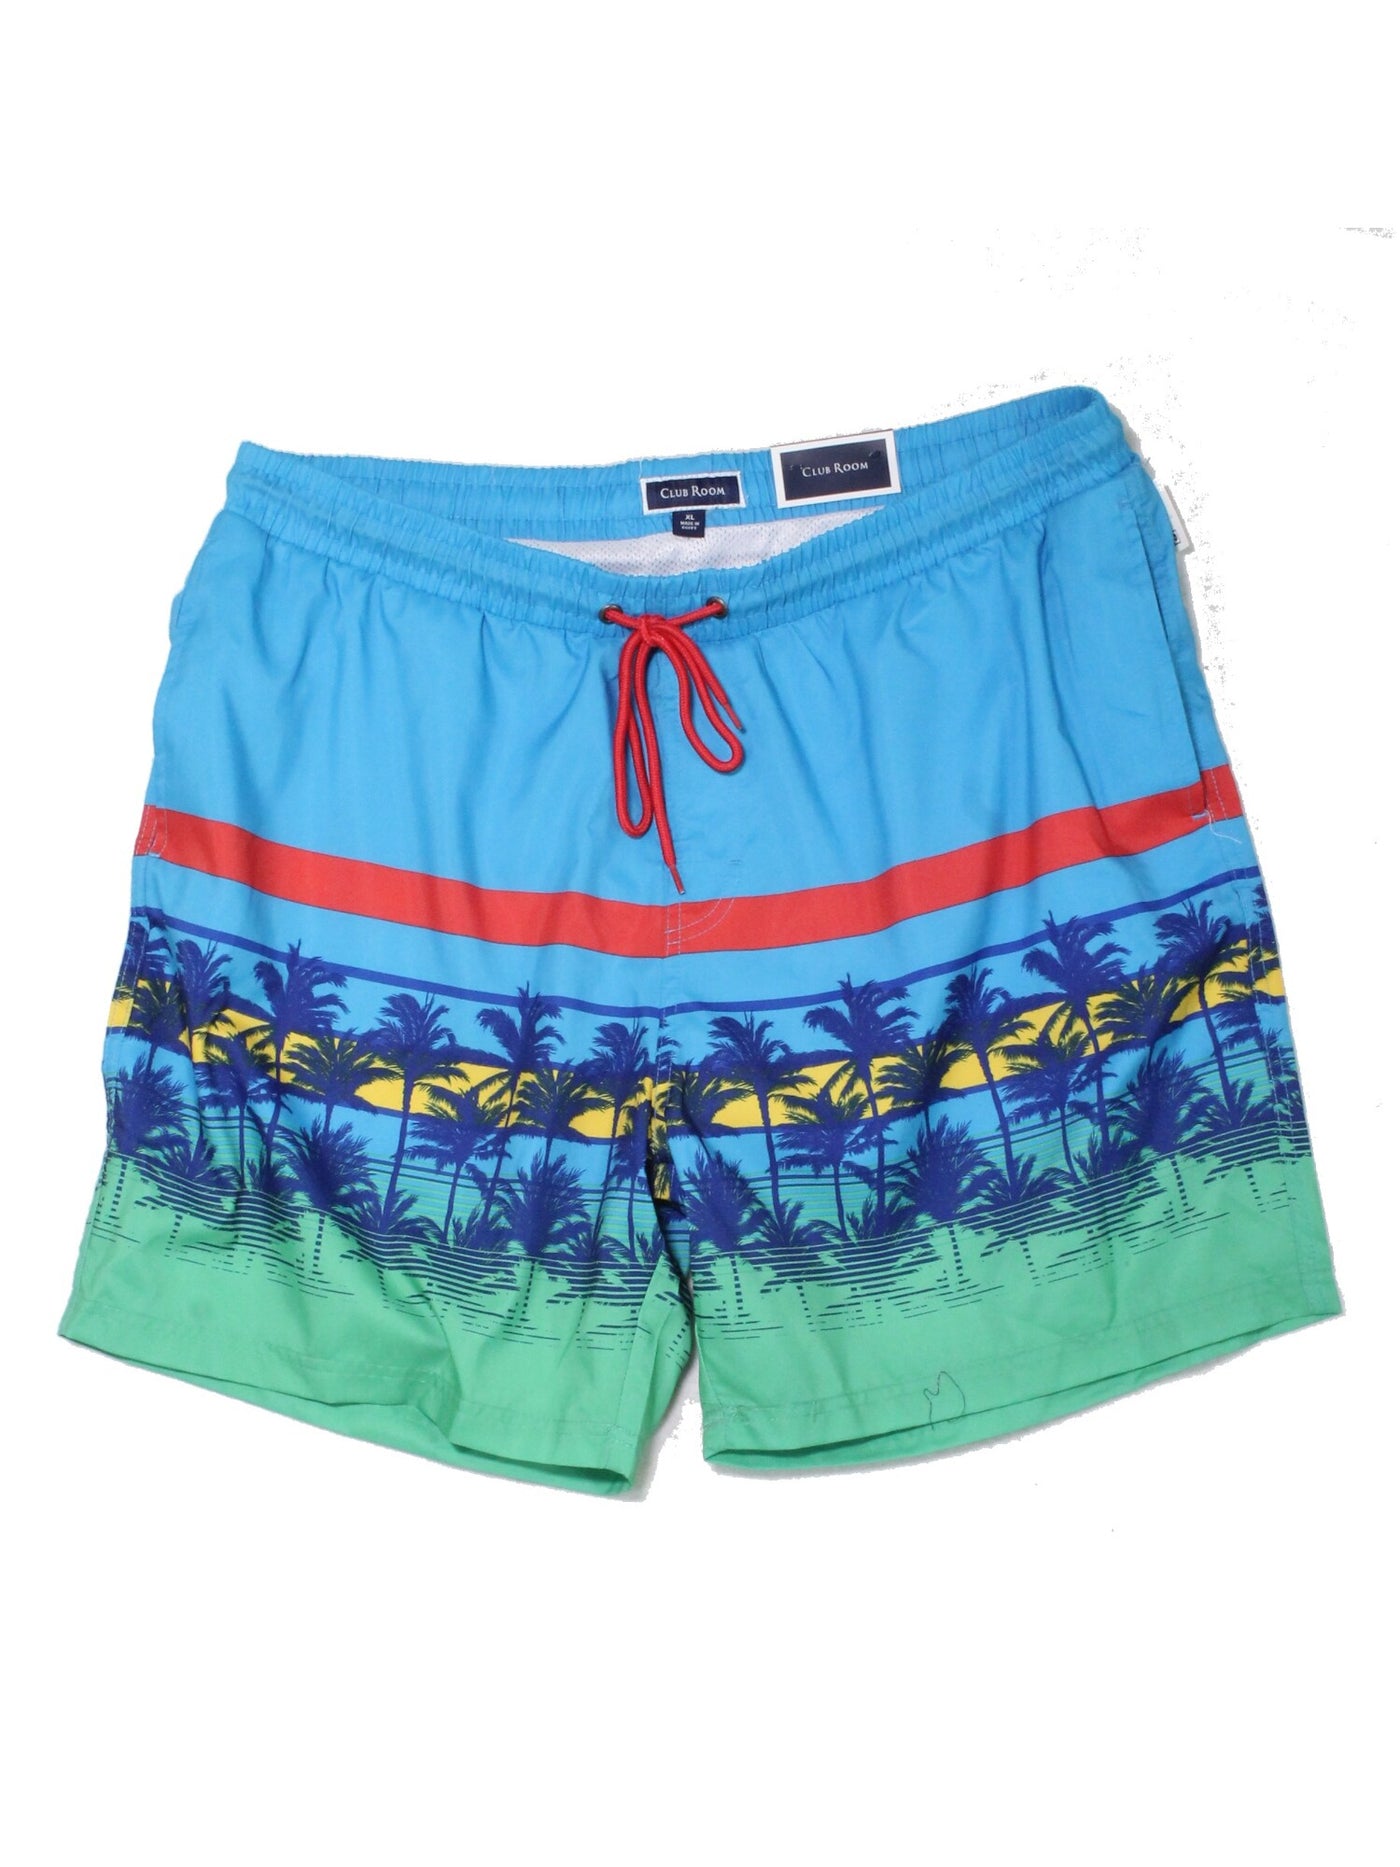 CLUBROOM Mens Blue Drawstring Flat Frong Graphic Regular Fit Quick-Dry Shorts S